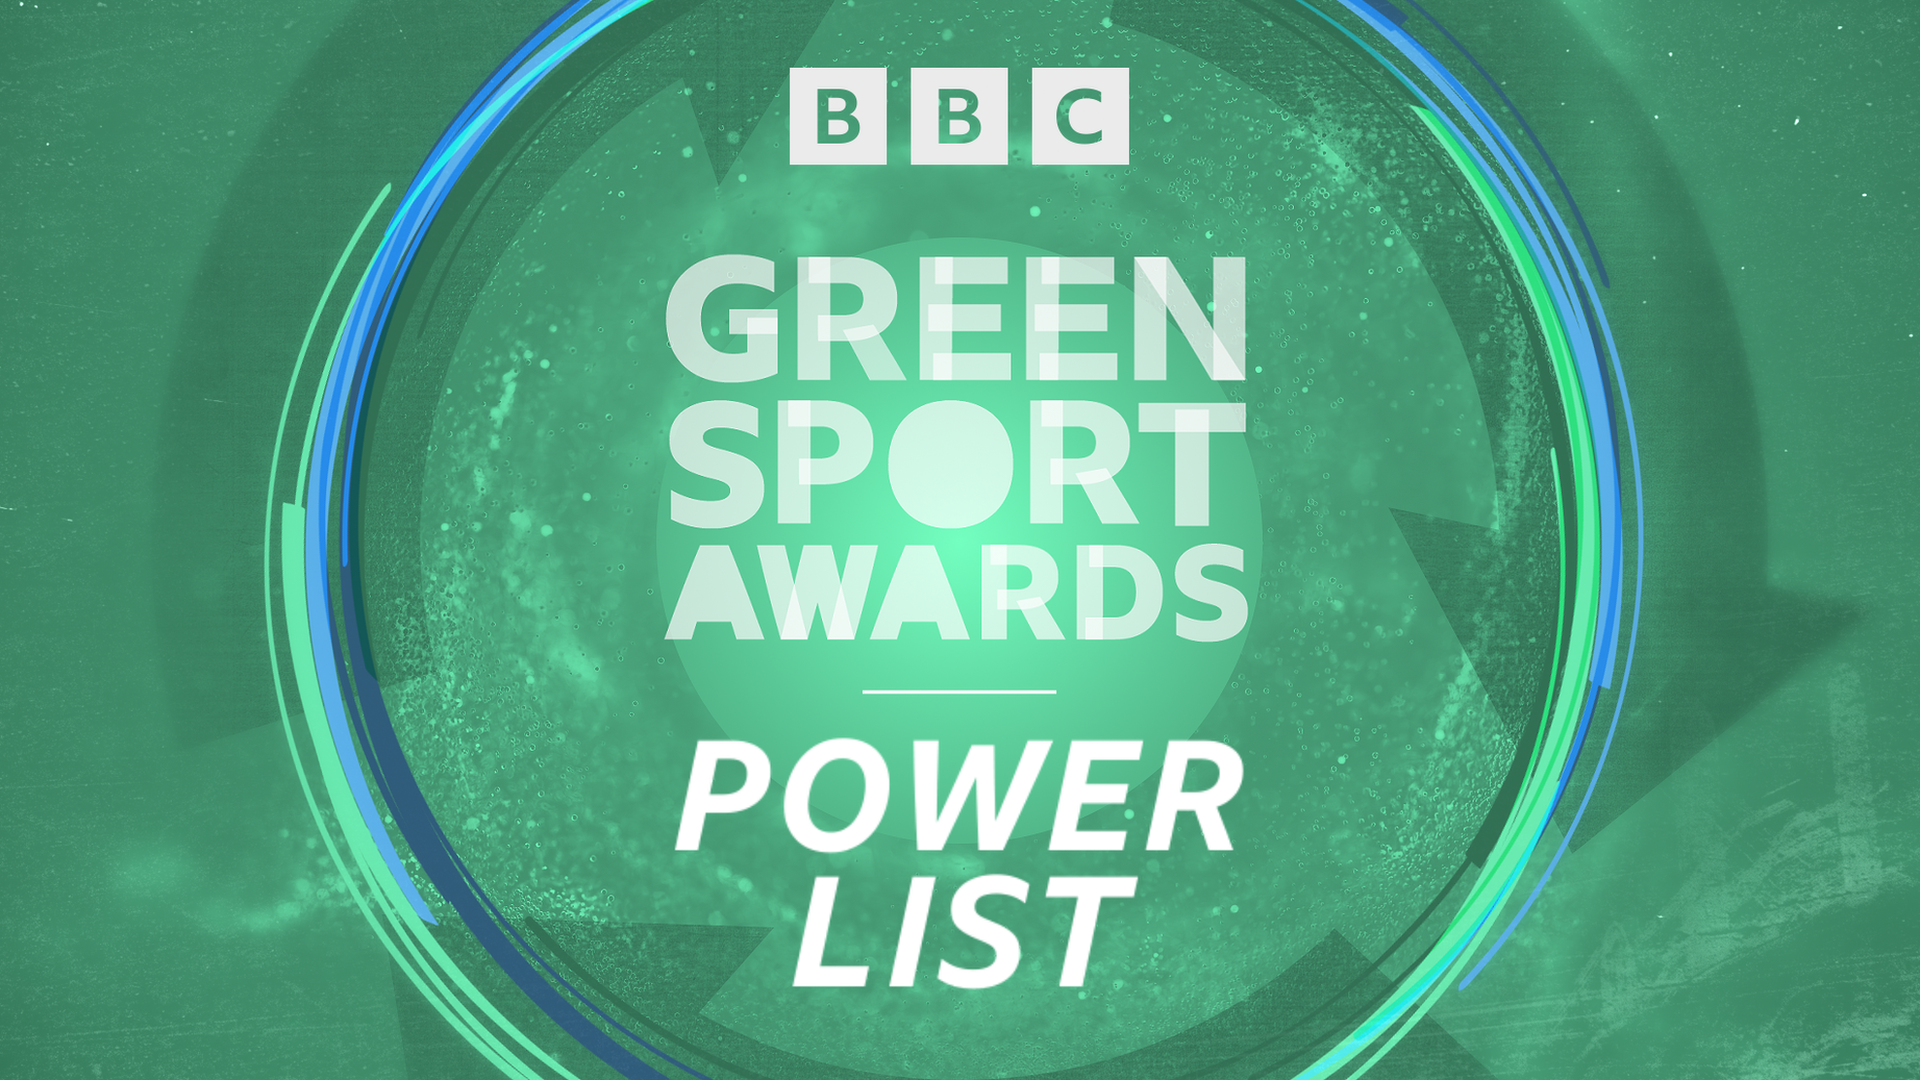 Nominees announced for first BBC Green Sport Awards